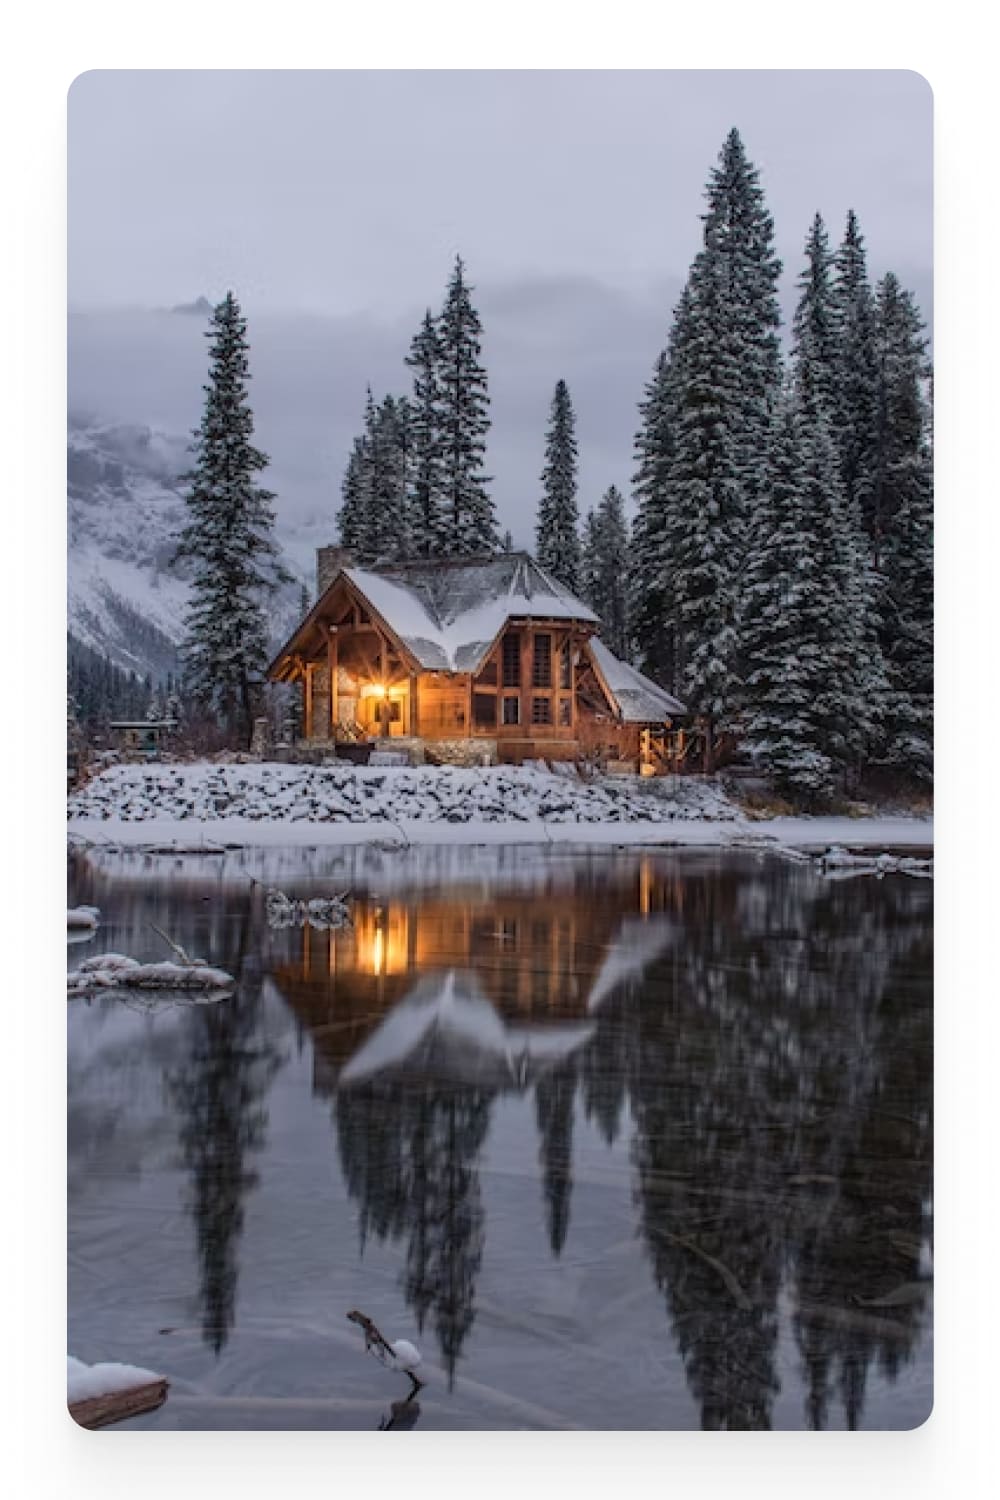 Photo of a house by the lake and firs covered with snow.